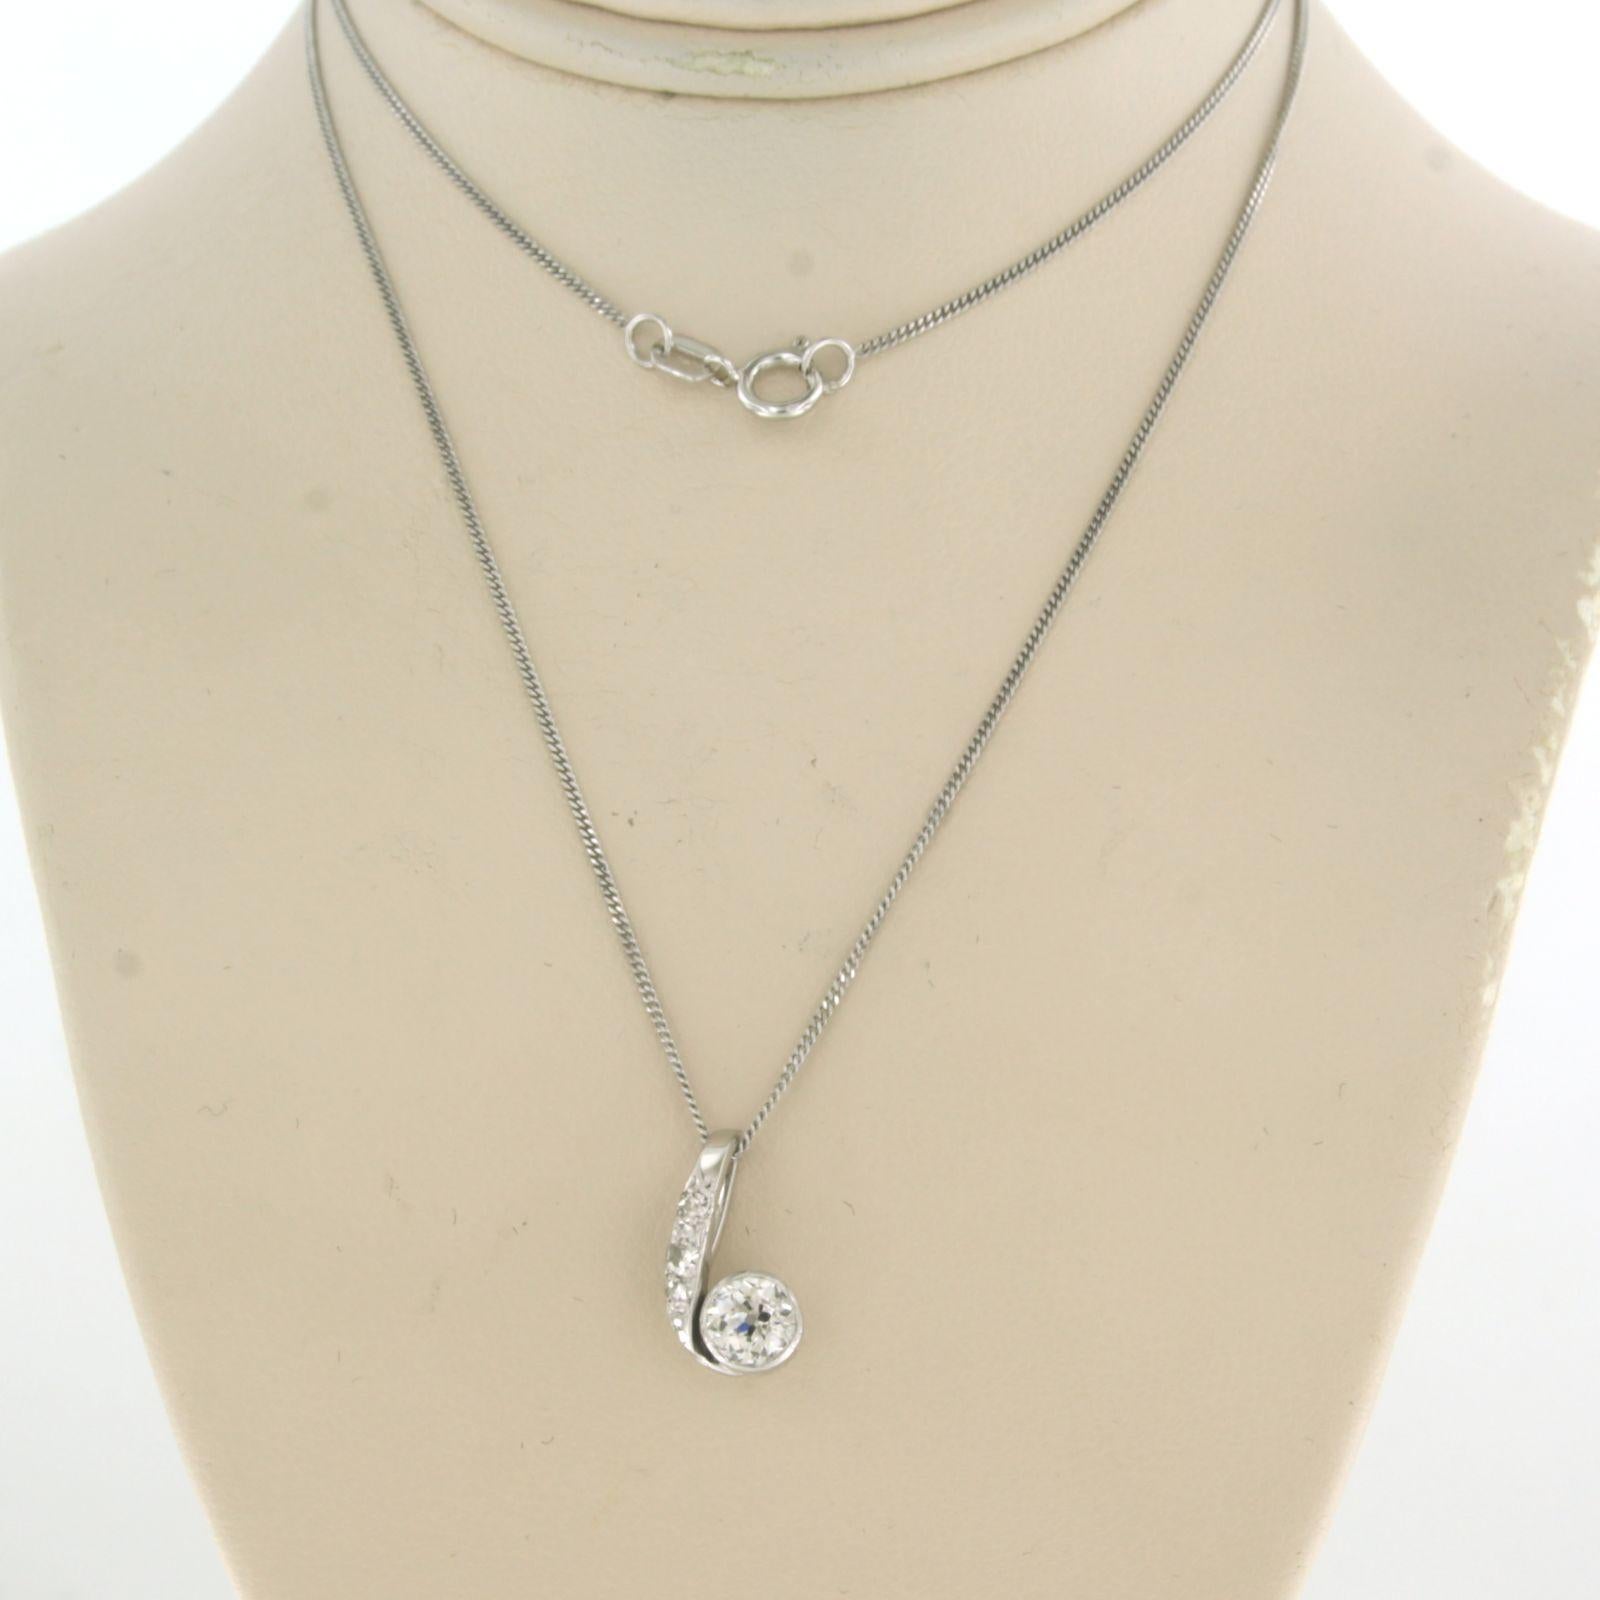 14k white gold necklace and pendant set with old European and single cut diamonds. 0.60ct – F/G – Pique, VS/SI – 45 cm long

detailed description:
The necklace is 45 cm long by 0.8 mm wide

the size of the pendant is 1.3 cm long by 7.2 mm